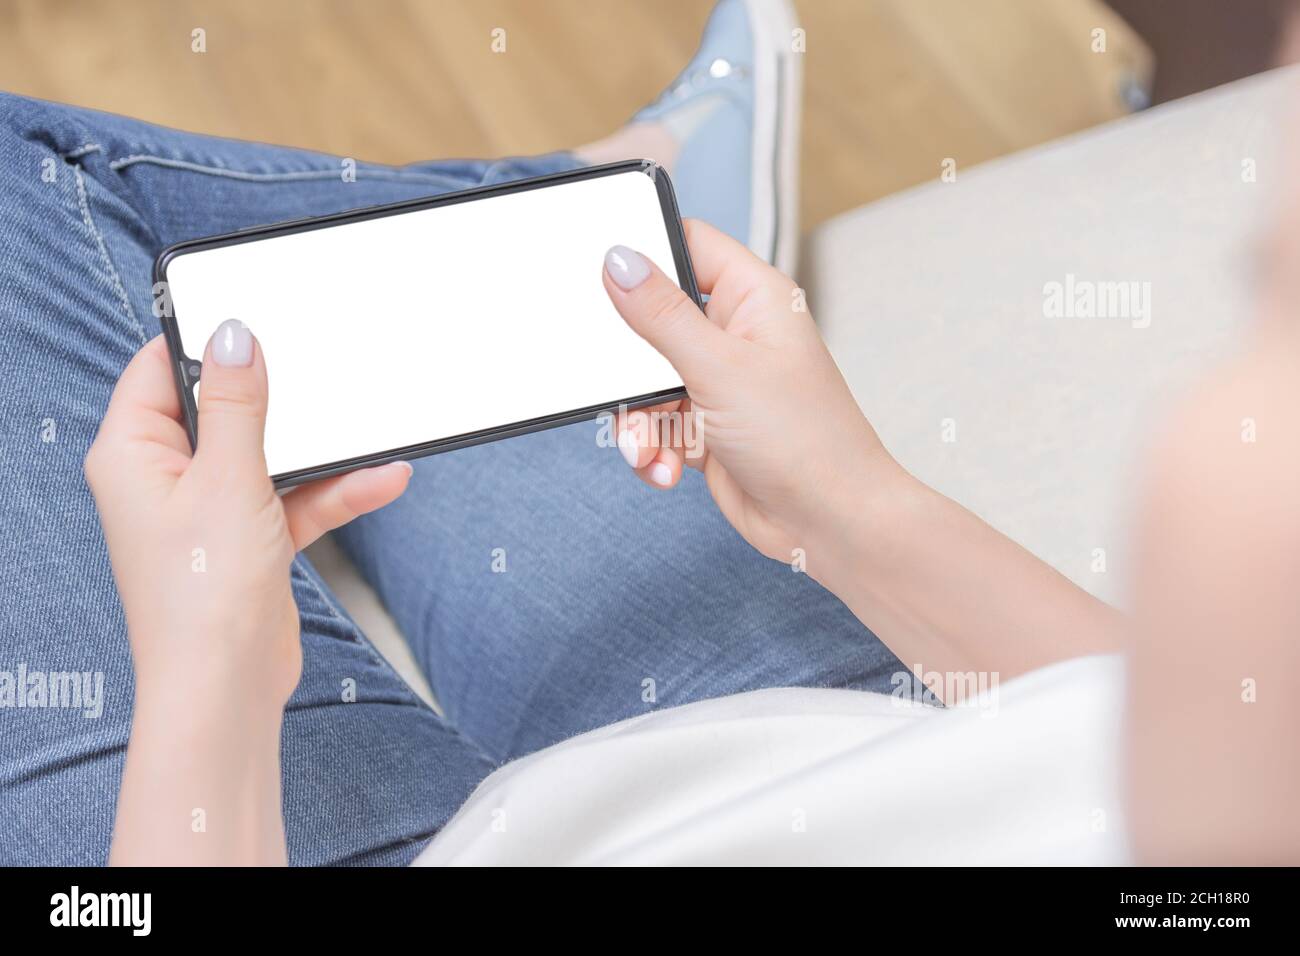 Mockup image of woman's hands holding white mobile phone with blank screen in horizontal position in horizontal position. Mockup cell phone. Top view. Stock Photo